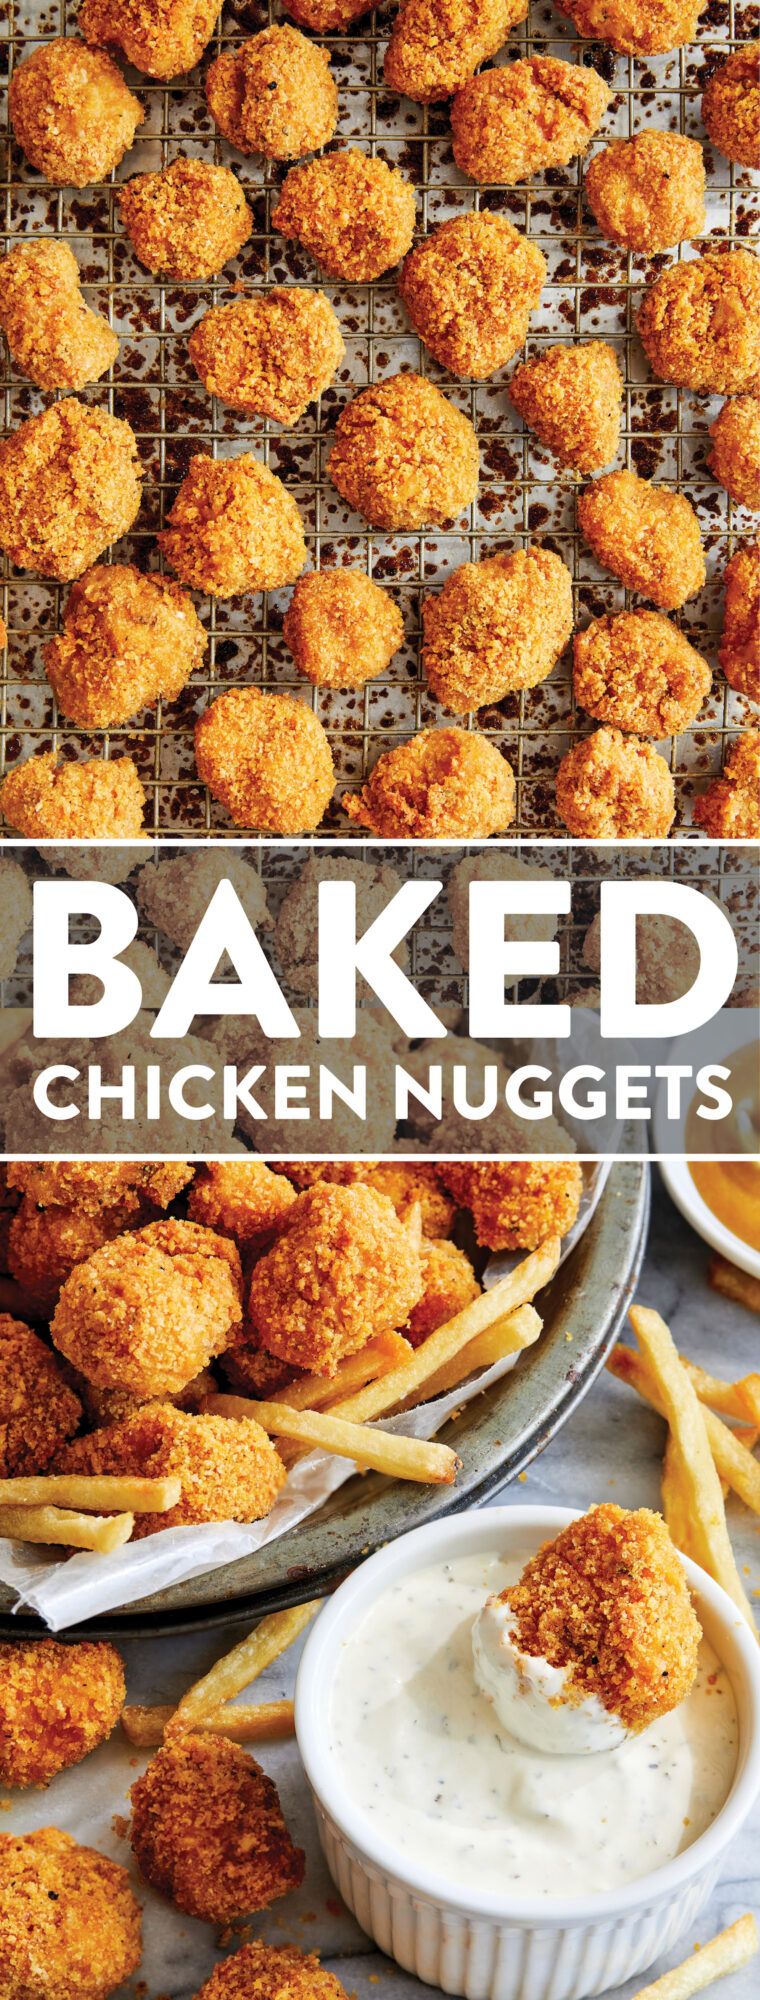 Baked Chicken Nuggets - The BEST crisp-tender chicken nuggets that are completely oven baked! Serve with ketchup, honey mustard or Ranch!